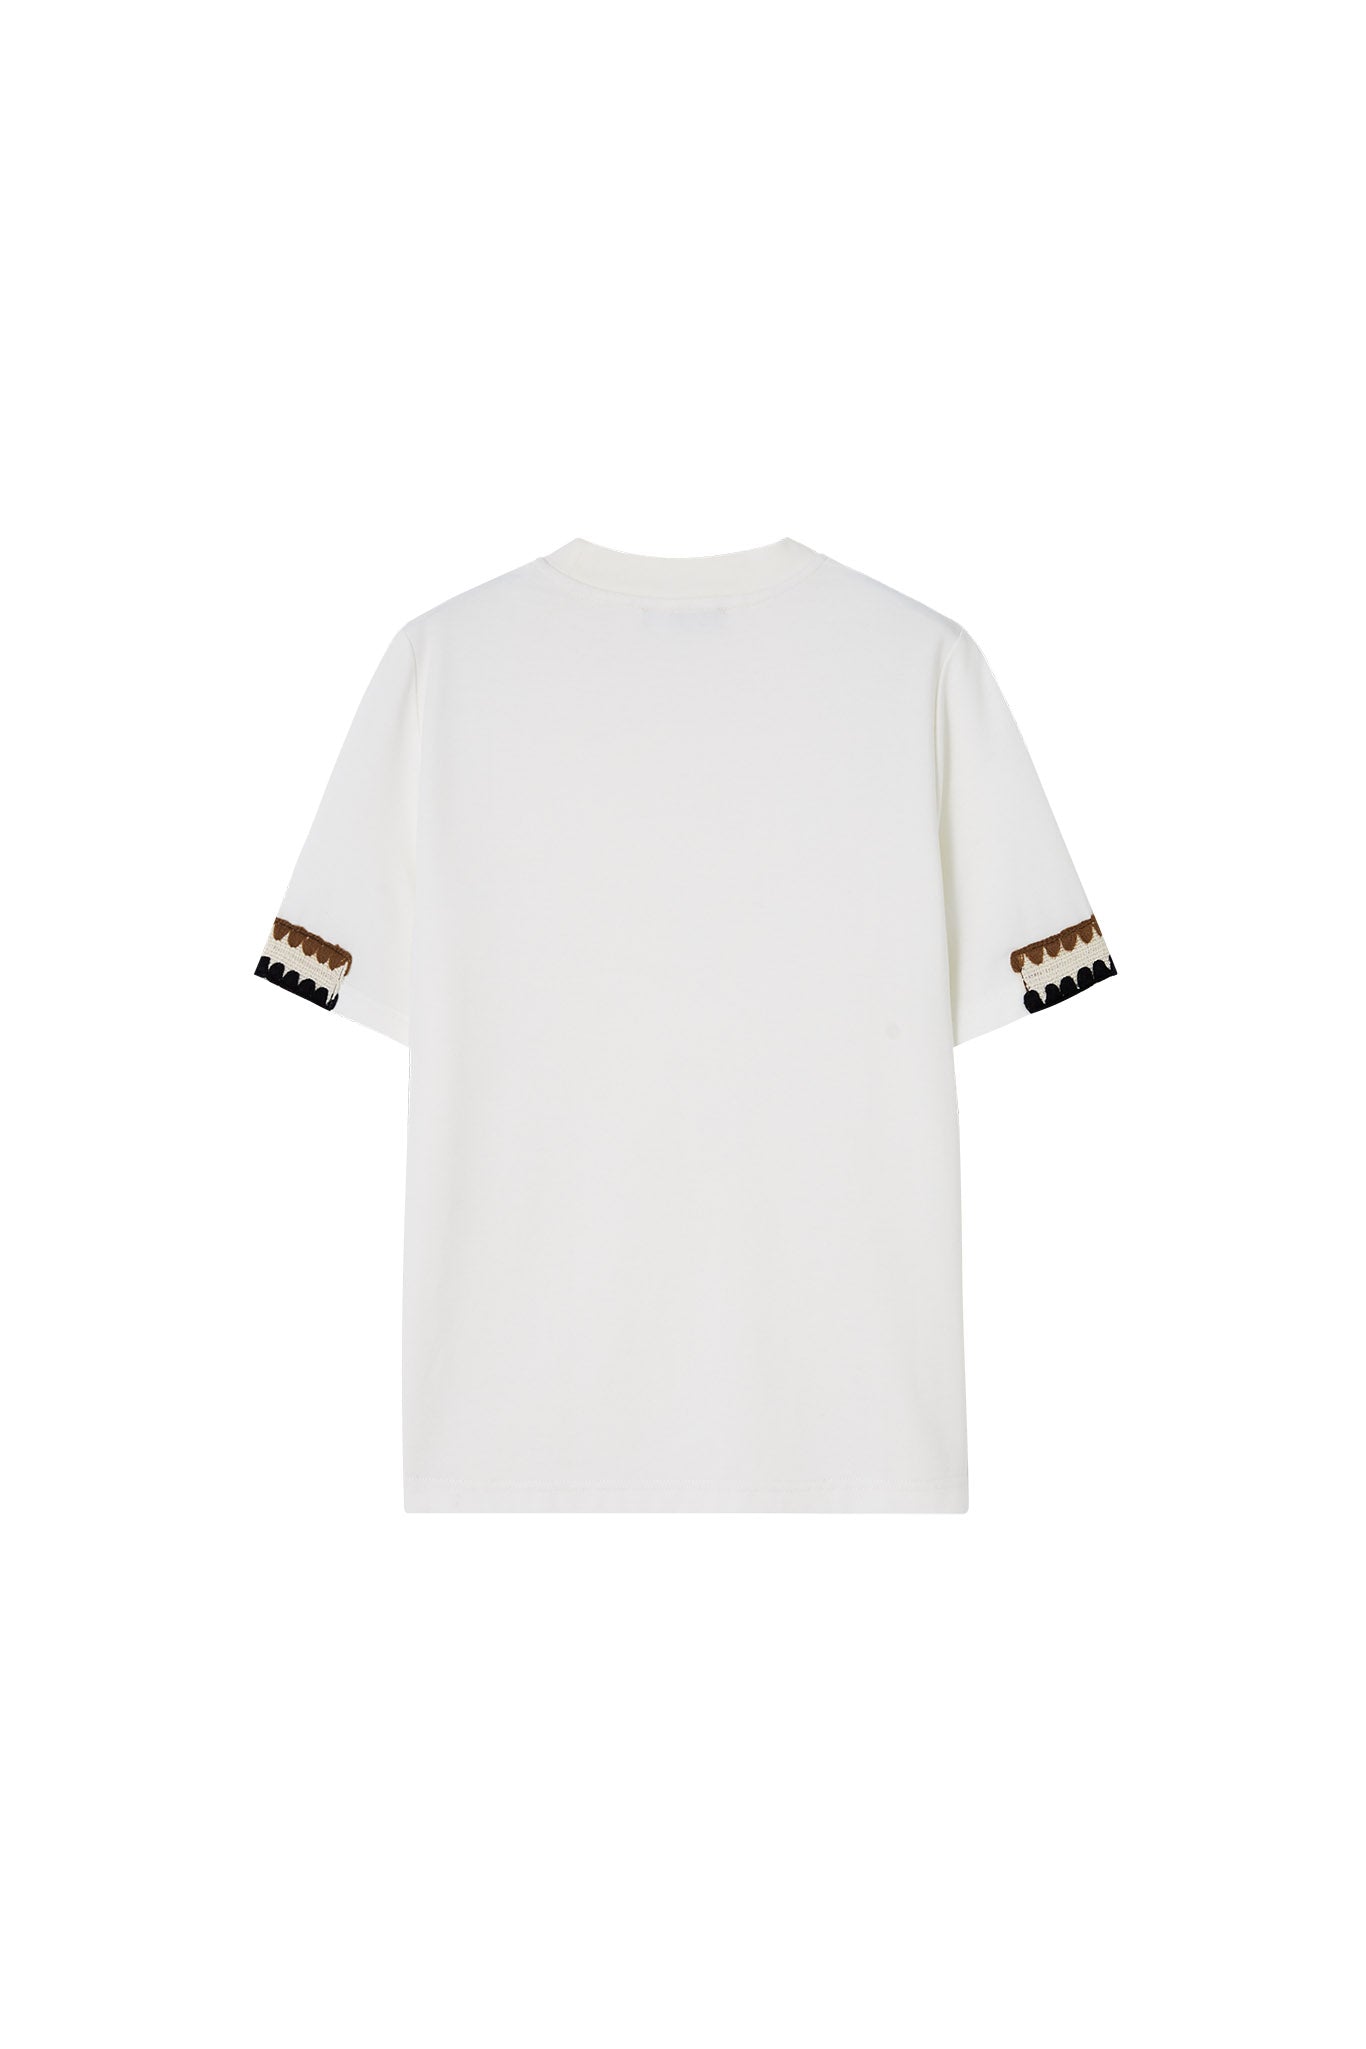 Sleeve design knit cut and sew / T-shirt